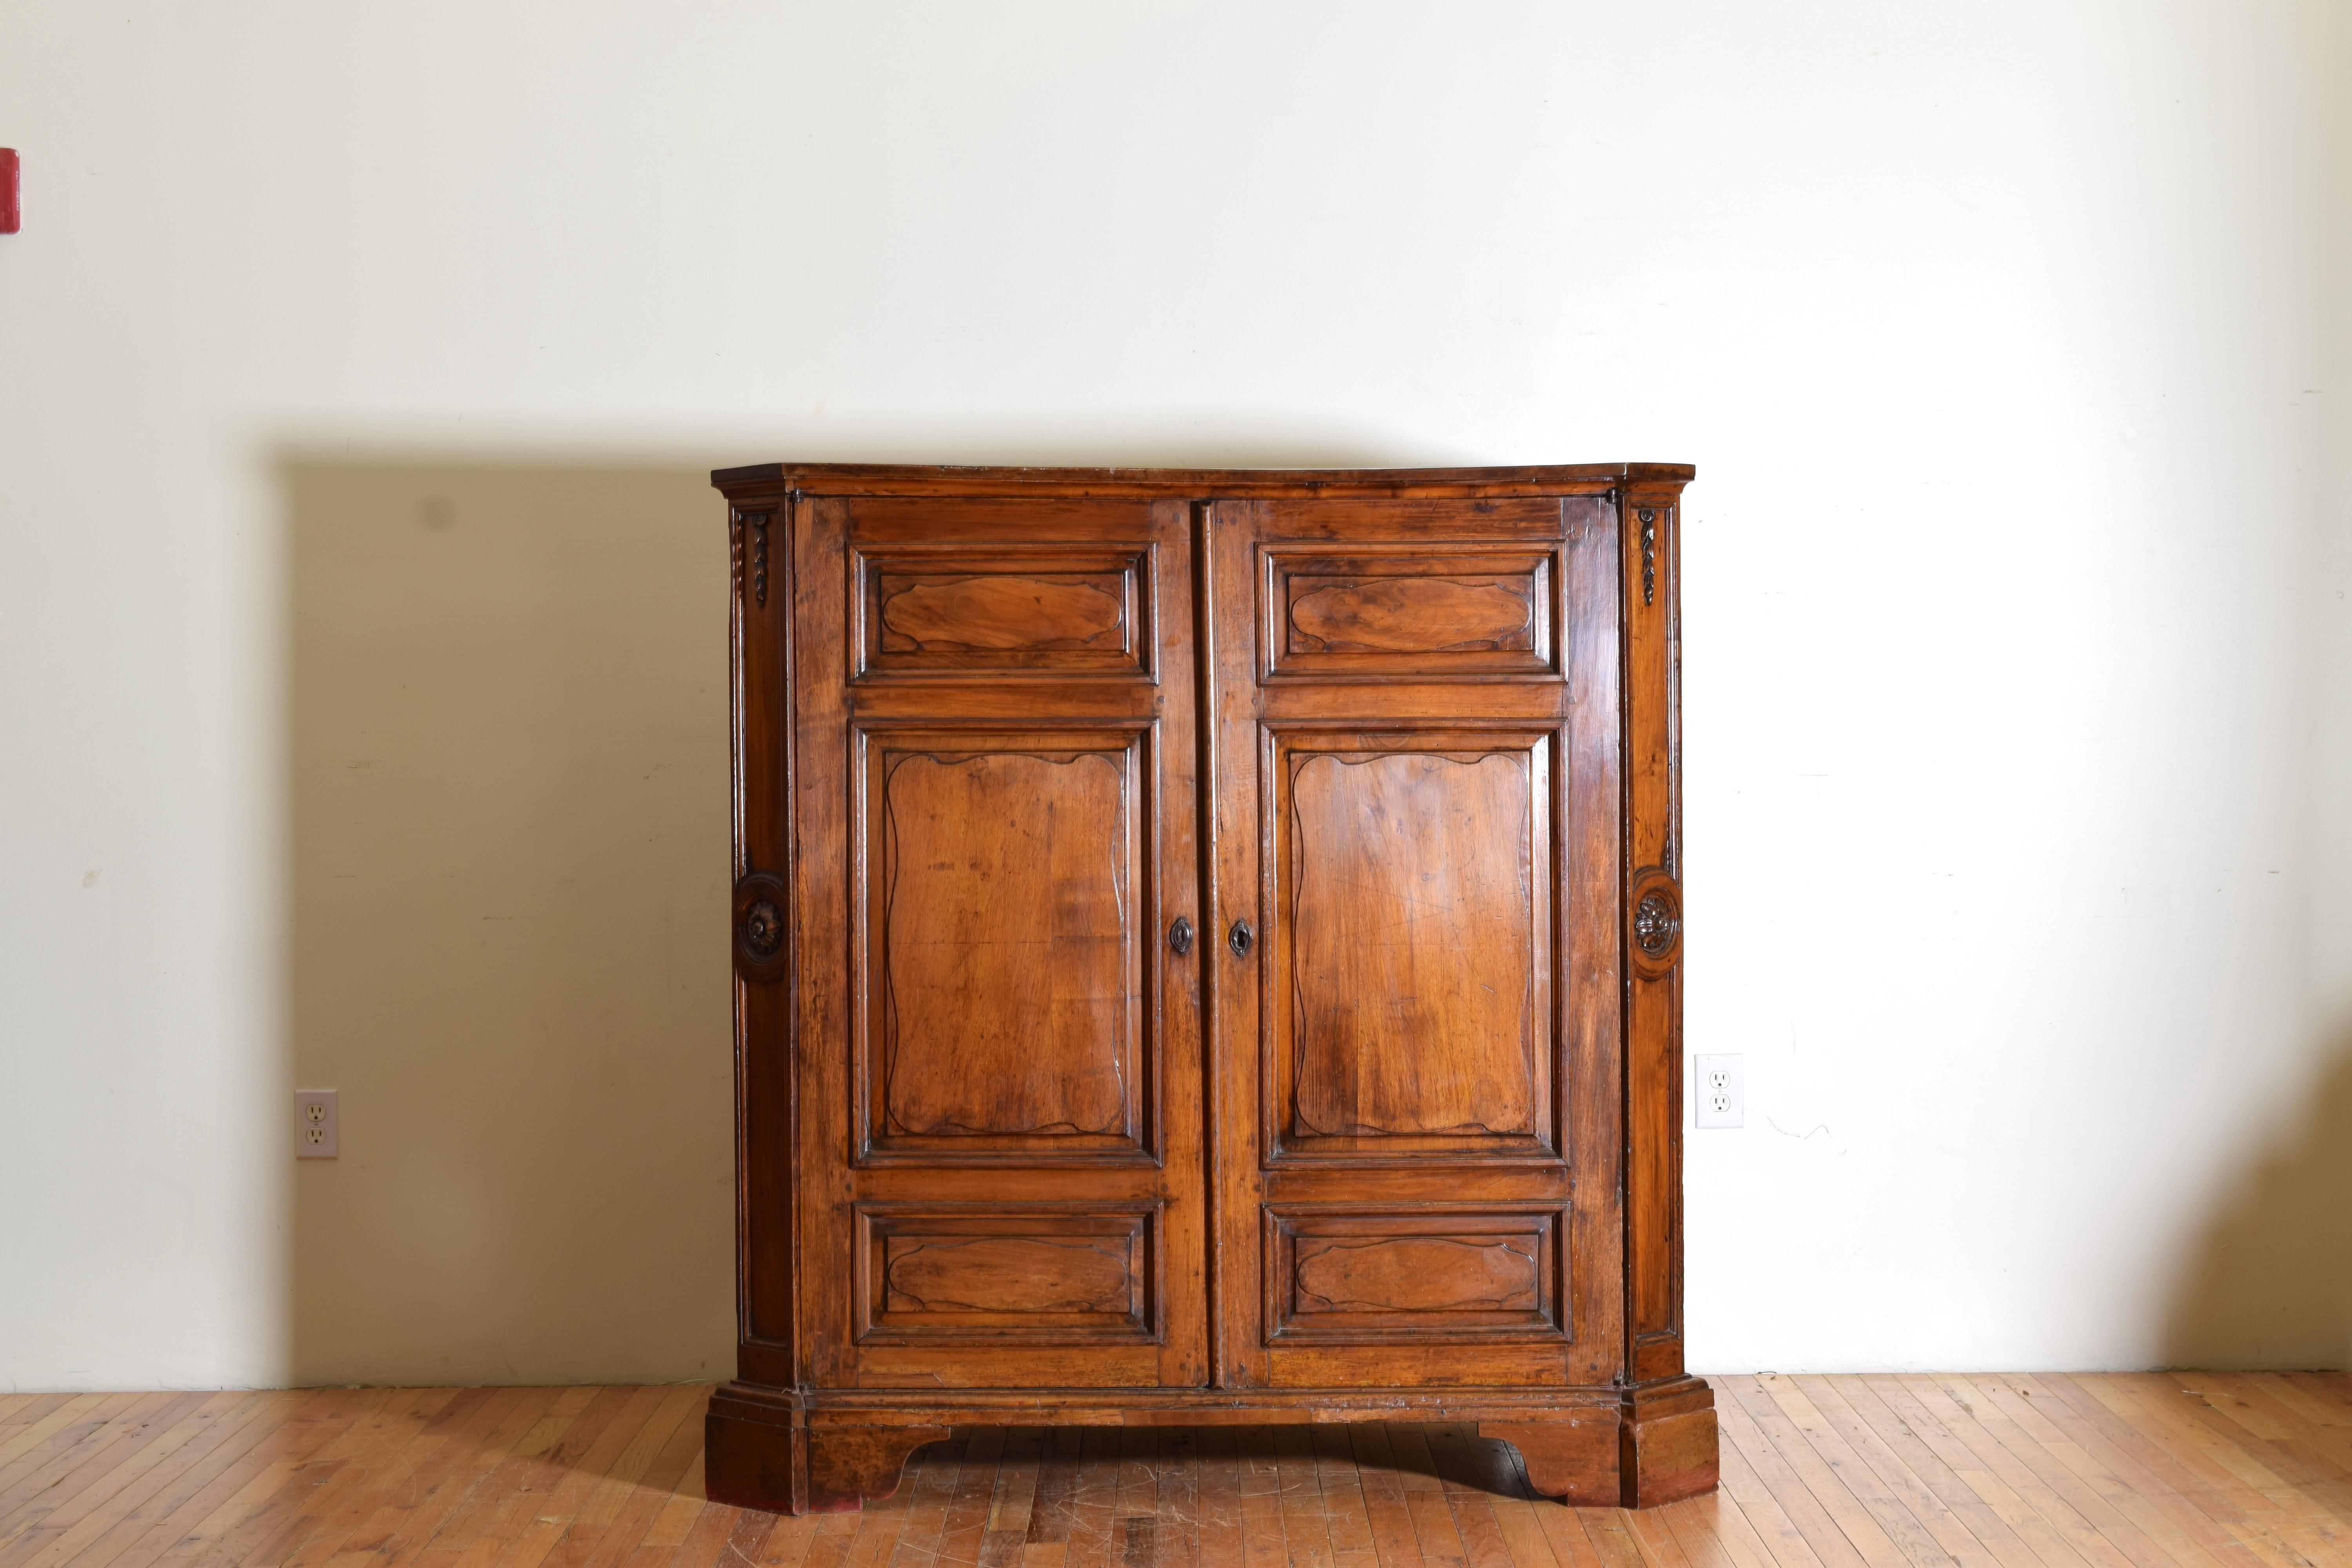 Having a rectangular top with canted corners above a conforming case with carved rosettes at corners and paneled doors and sides, the interior with shelving and a bottom drawer, rasied on a plinth-form base.